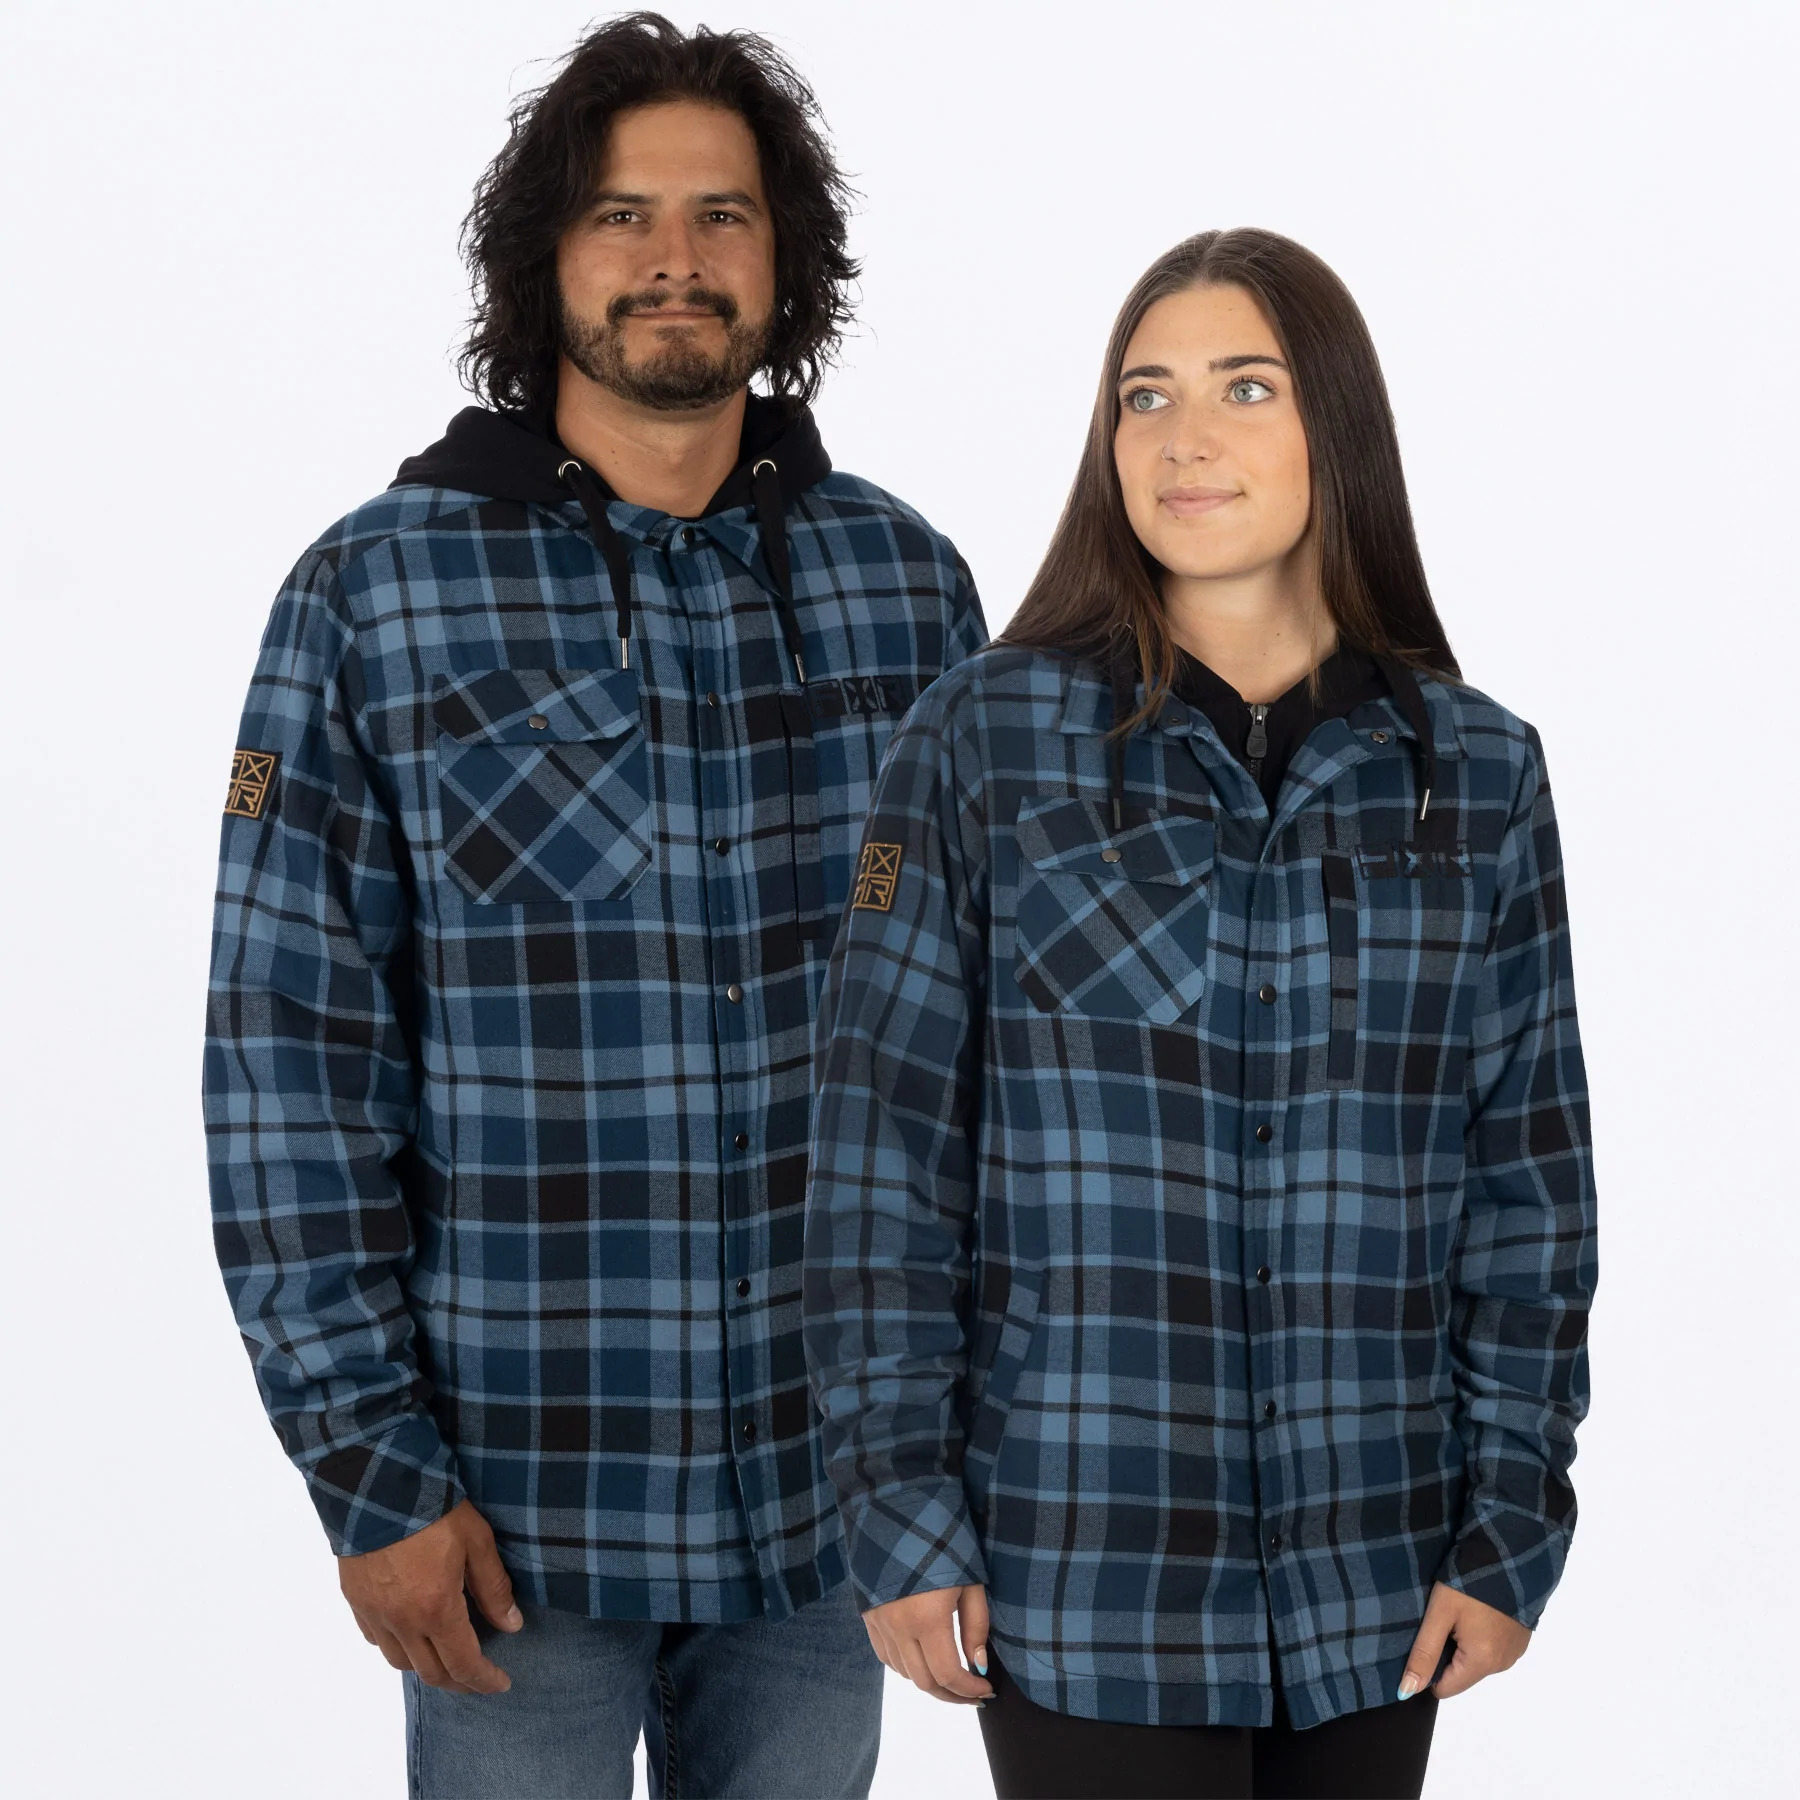 fxr racing jackets for mens adult unisex timber insulated flannel